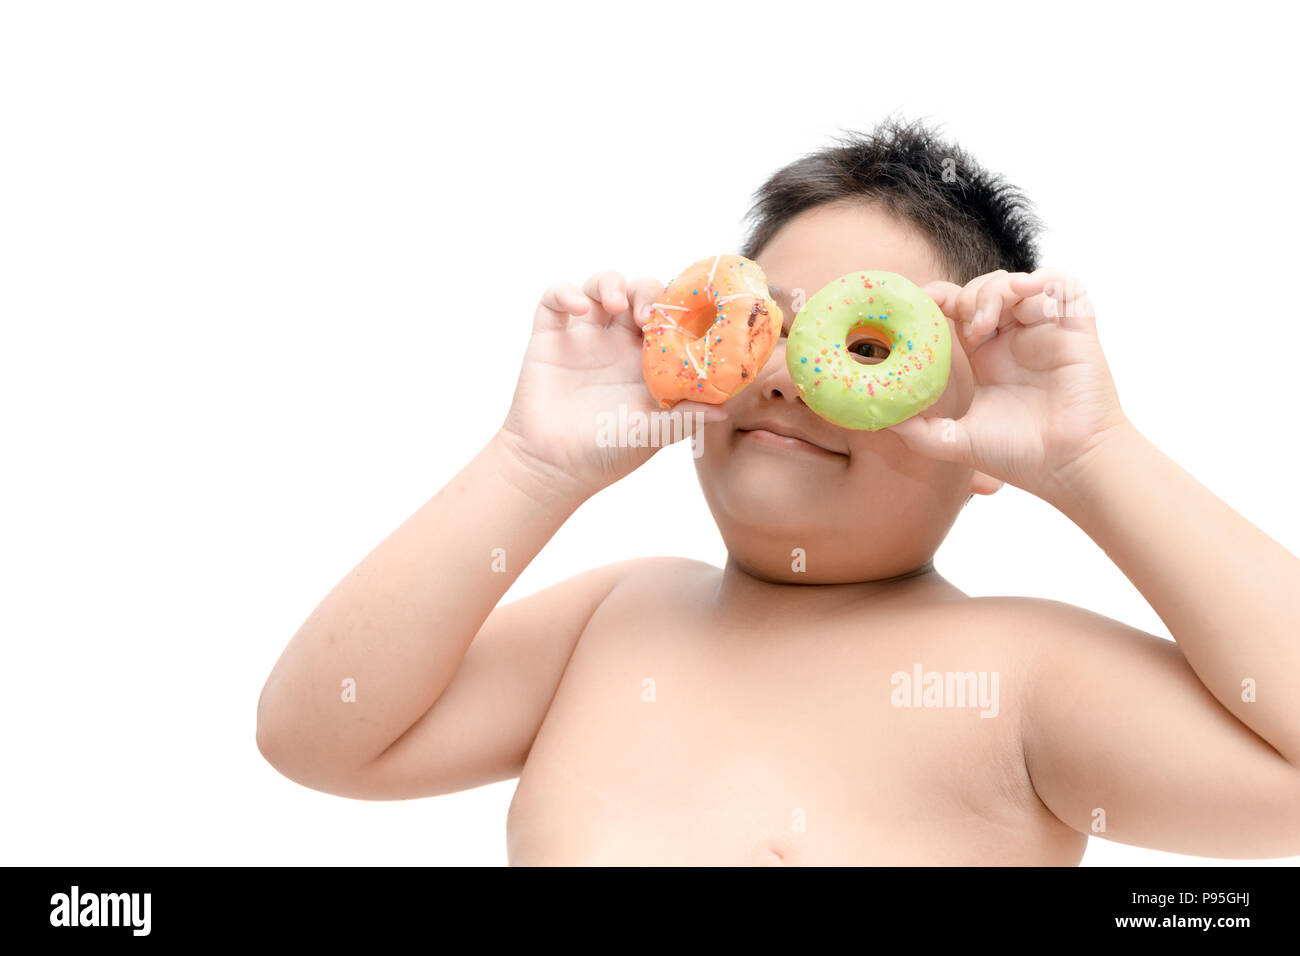 Obese fat boy is eating donut isolated on white background, junk food and dieting concept Stock Photo